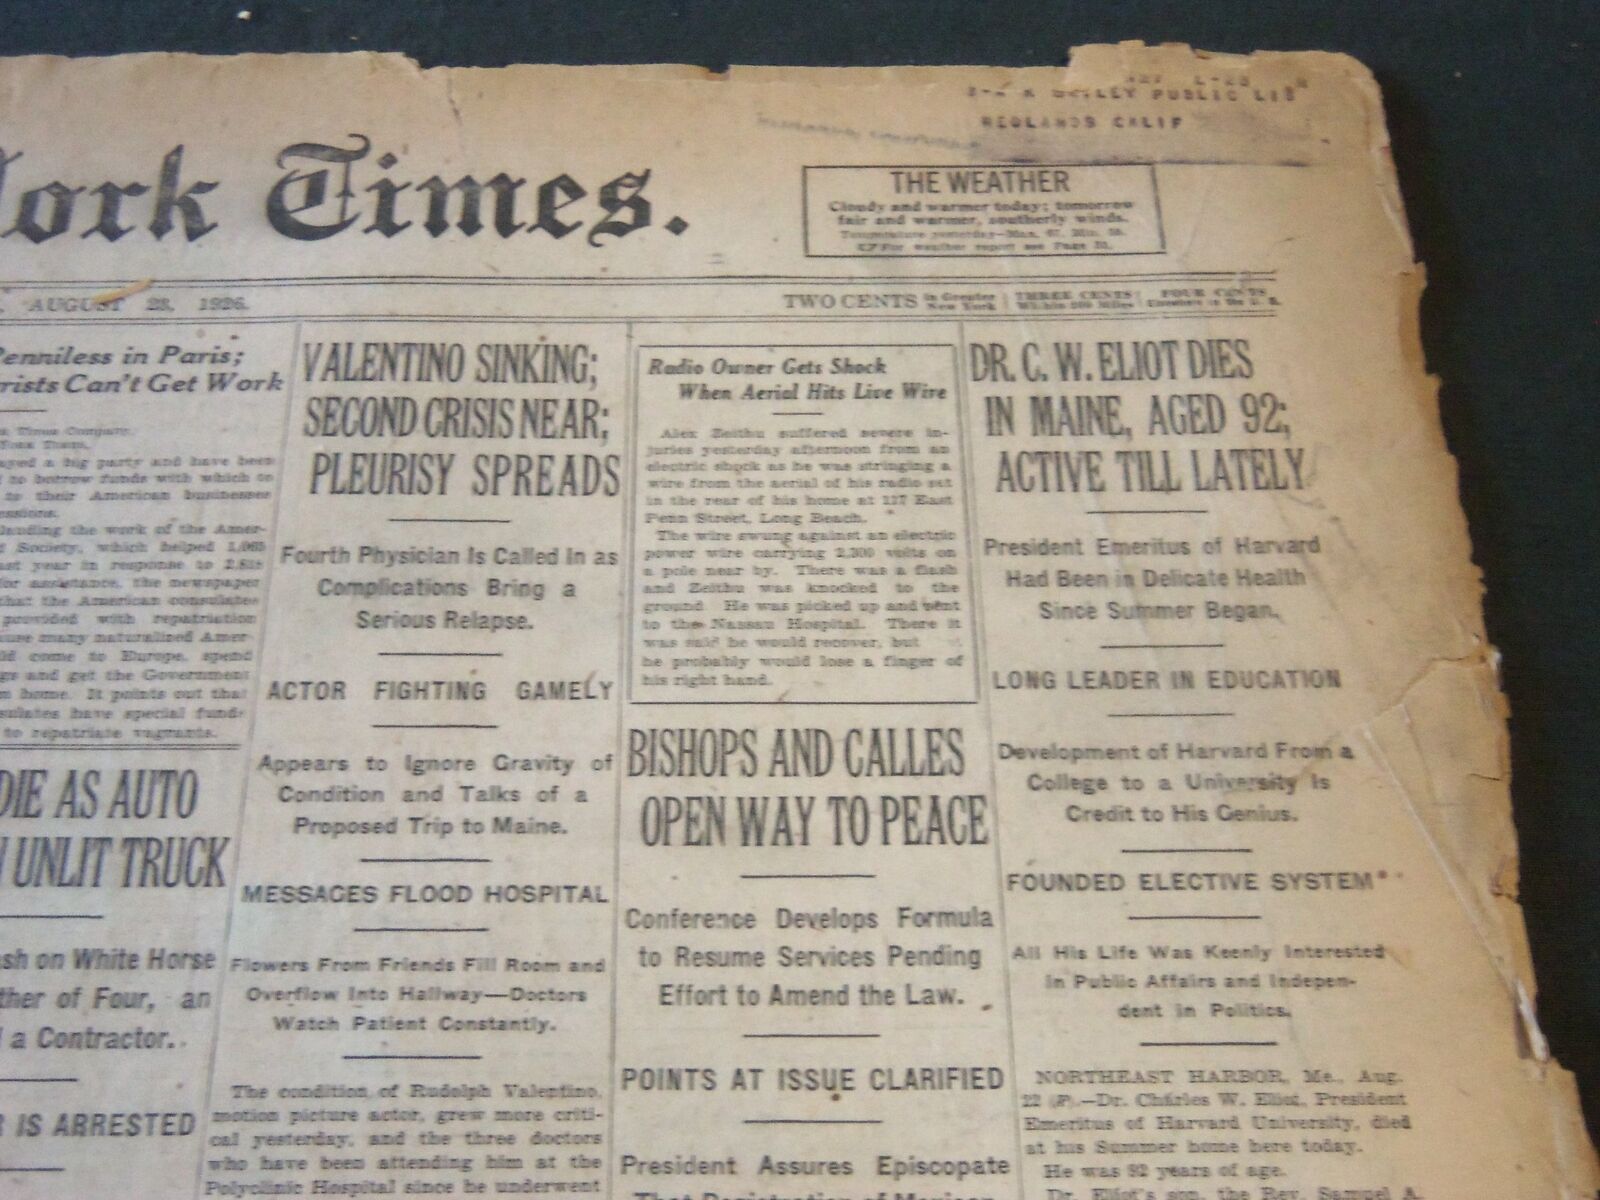 1926 AUGUST 23 NEW YORK TIMES - DR. CHARLES ELIOT DIES AT 92 - NT 6307